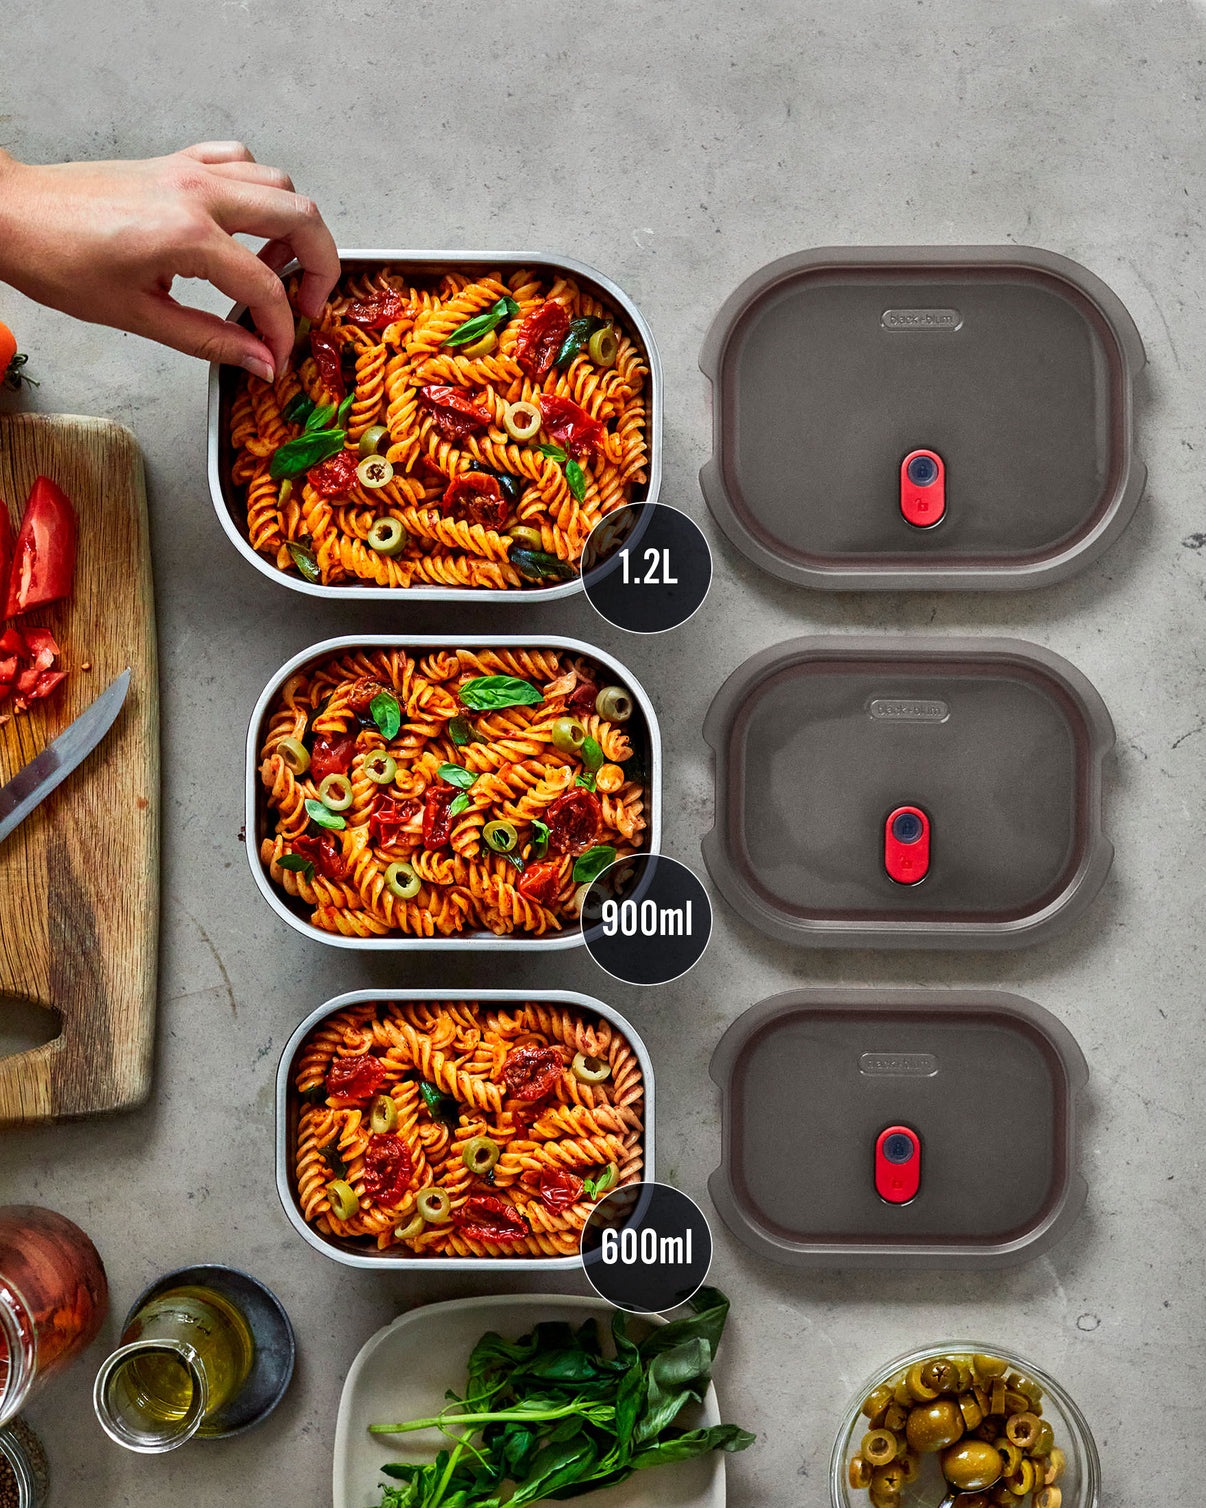 Tupperware Meal Prep Containers in Food Storage Containers 